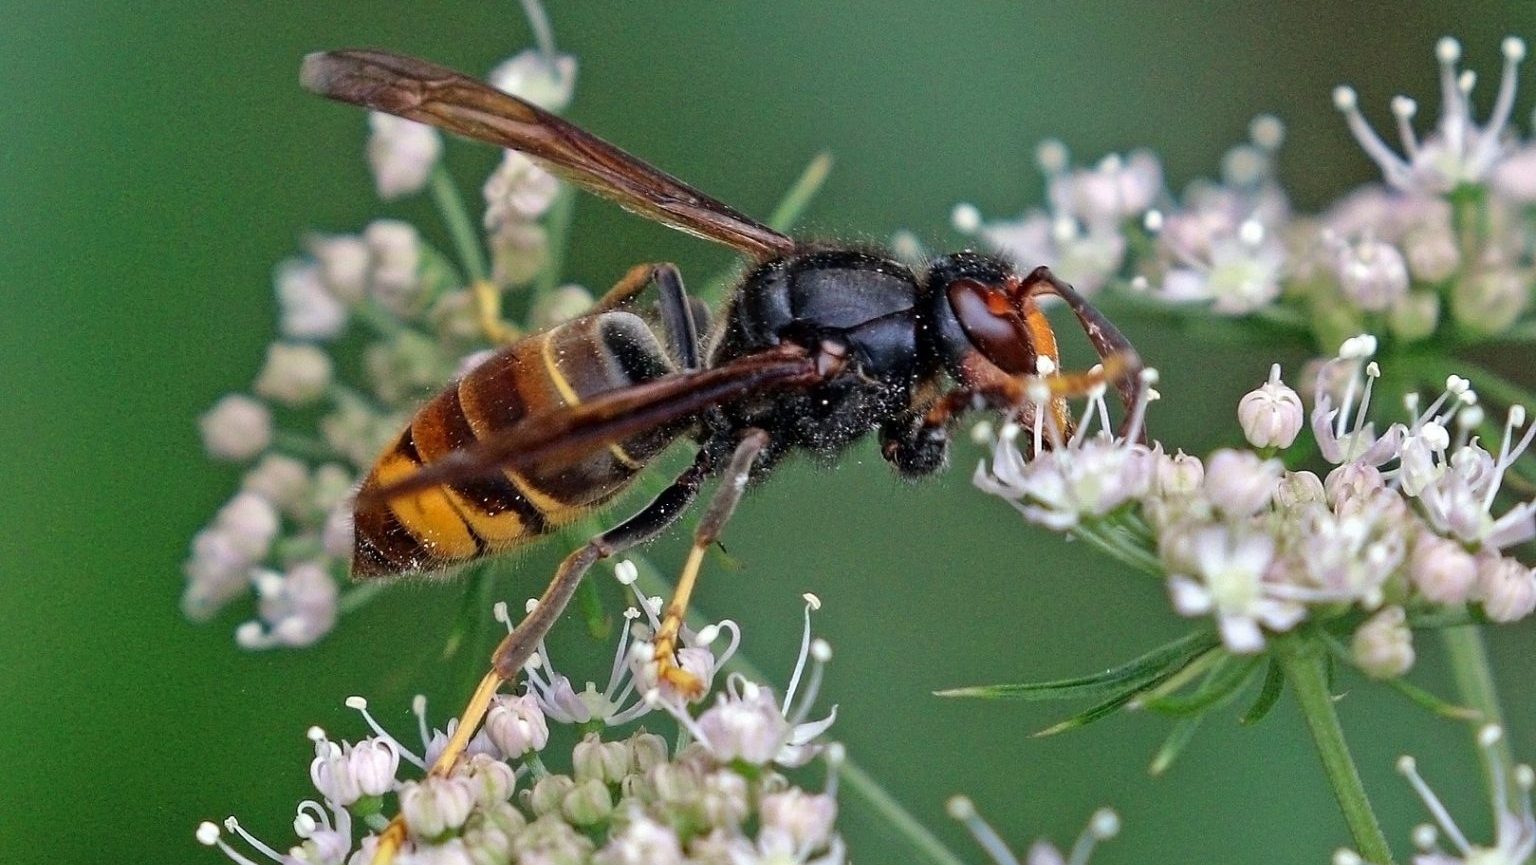 Close-up of a hornet with black and yellow stripes on its body, perched on small white flowers against a green background.